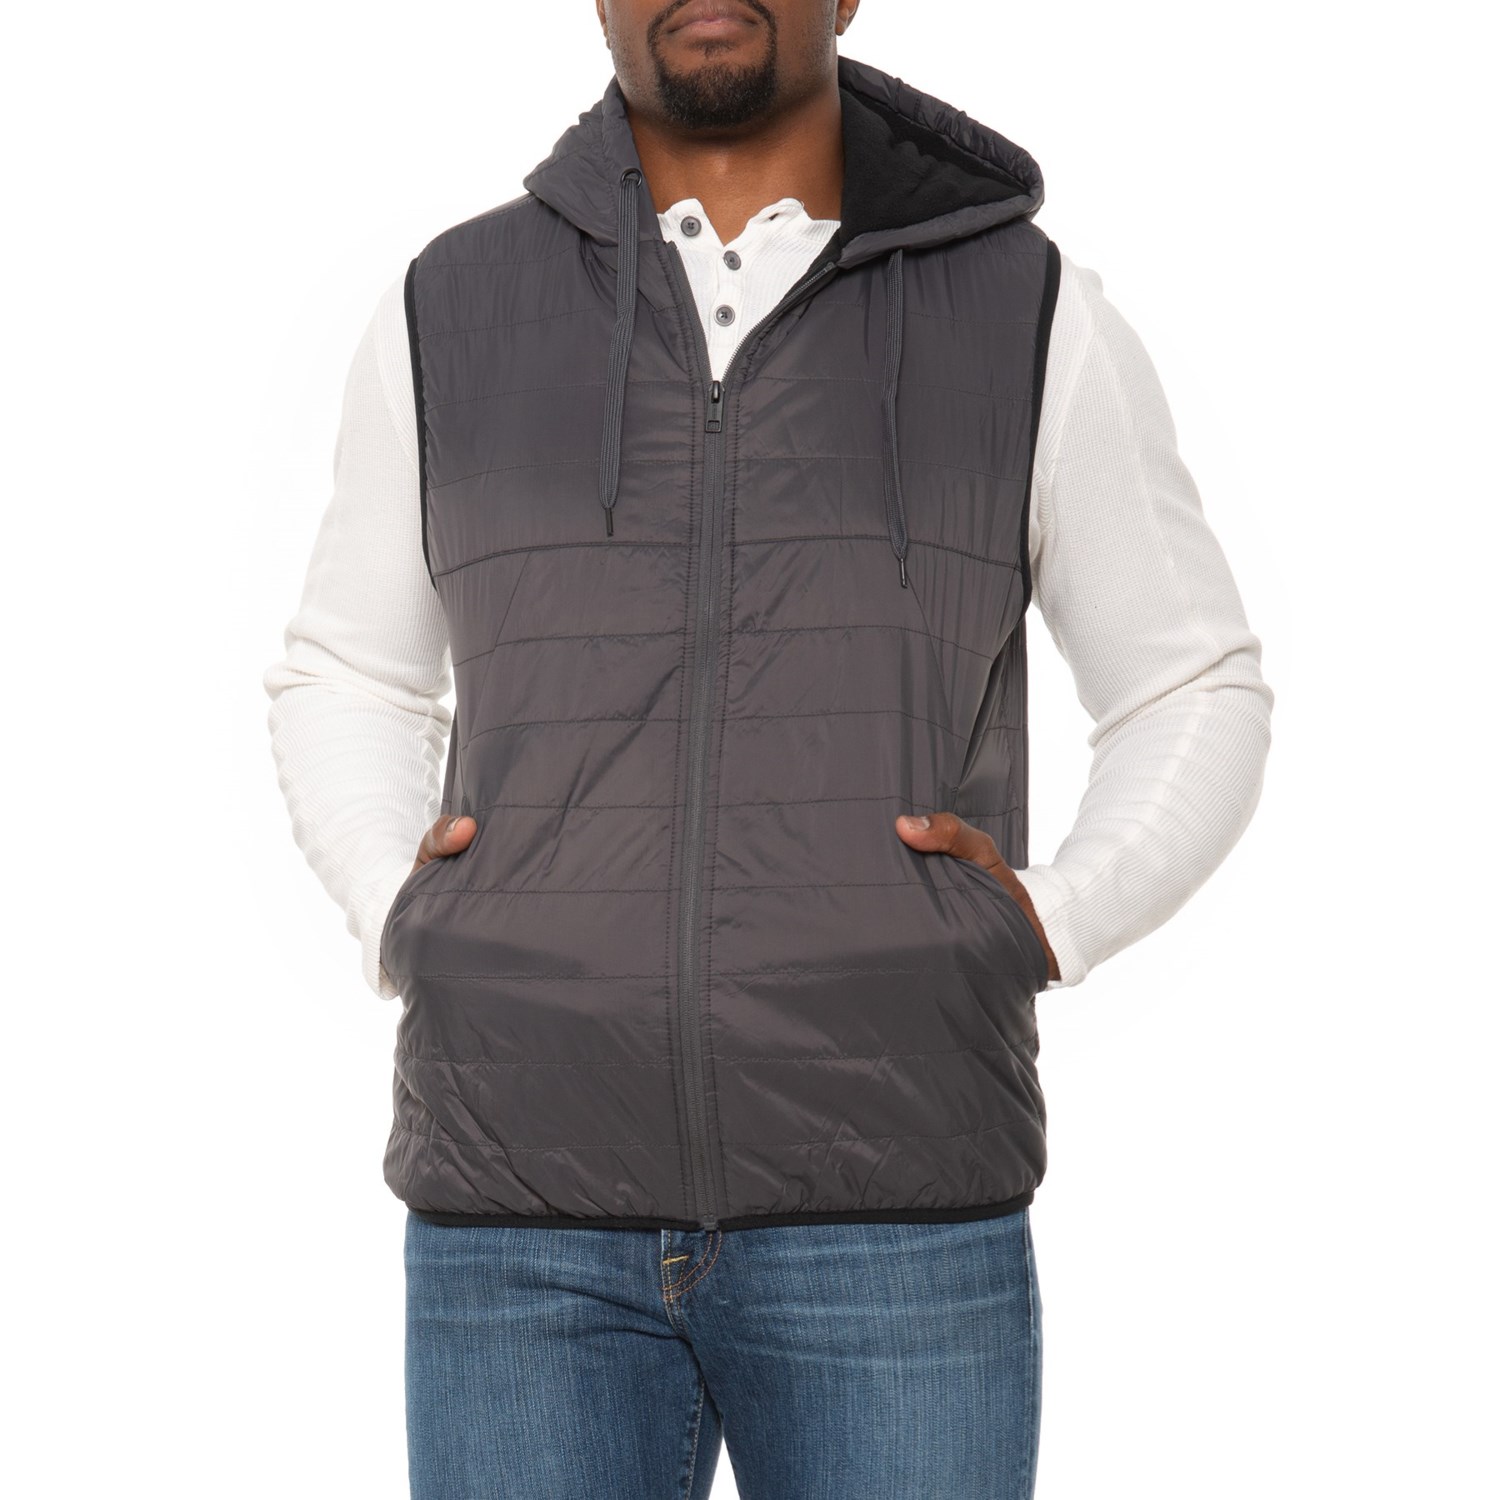 Weatherproof Vintage Nylon Quilted Vest - Insulated - Save 47%